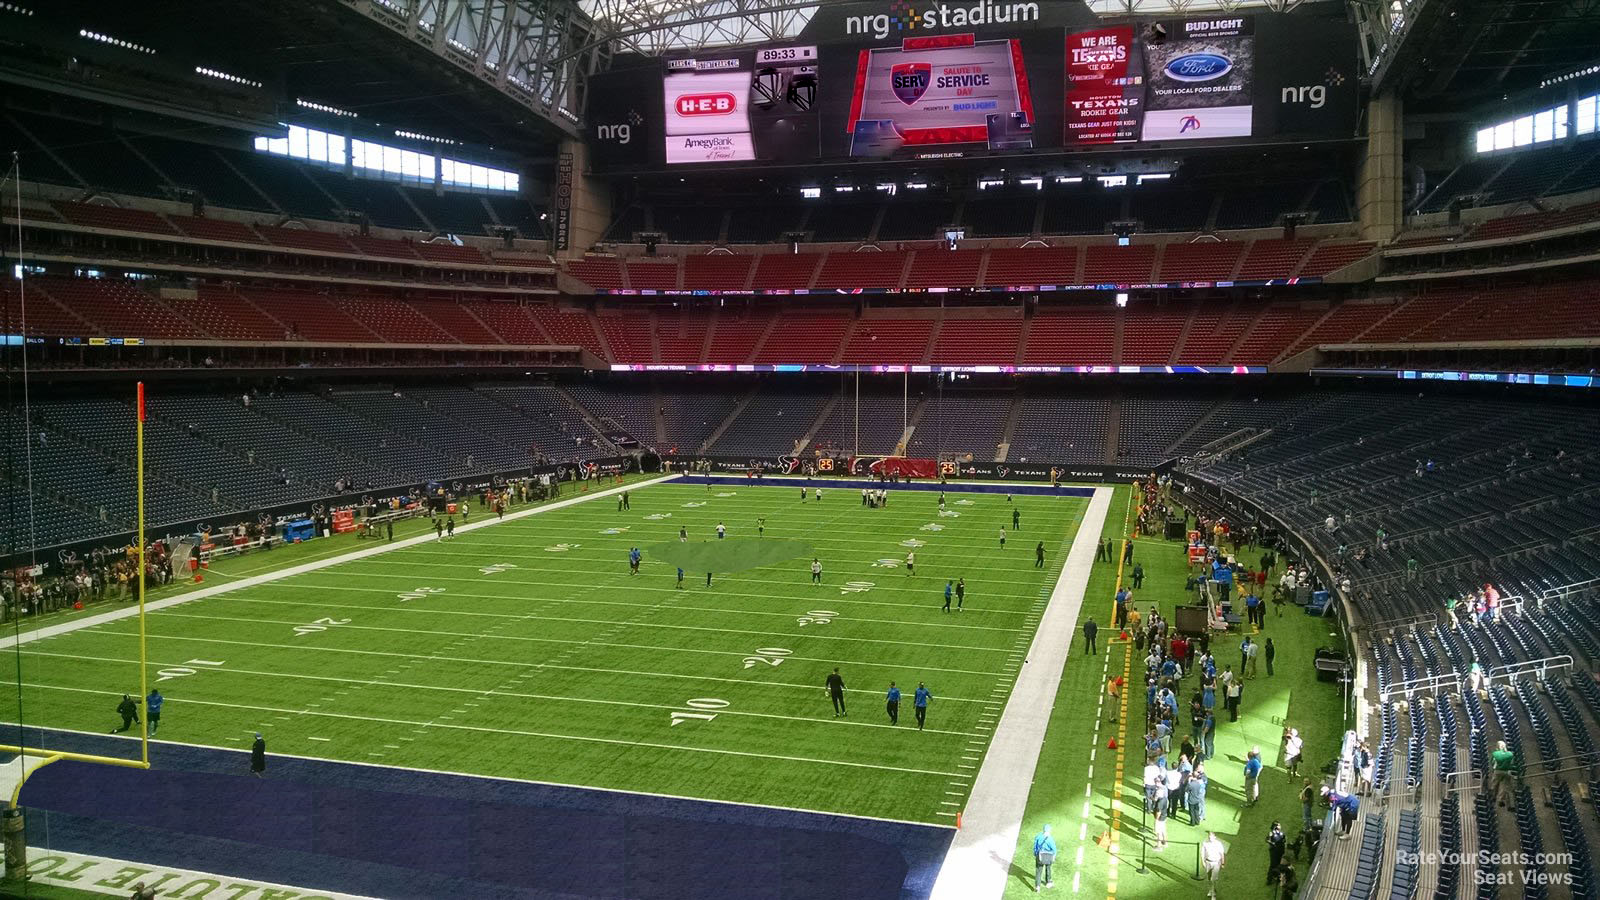 section 349, row a seat view  for football - nrg stadium